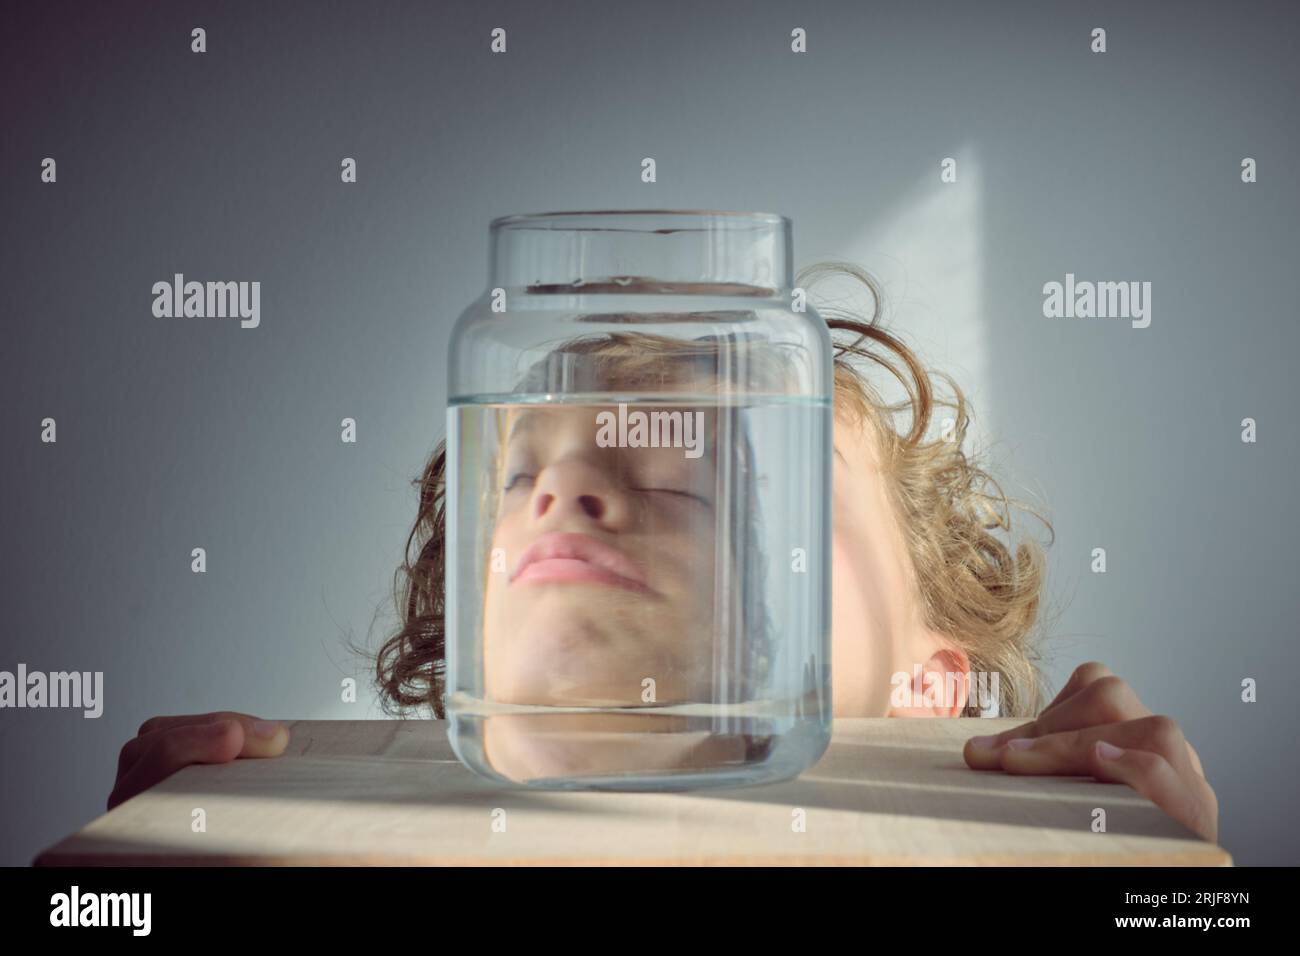 Sleepy curly blond haired kid reflection in glass transparent bottle of clear water against white background Stock Photo